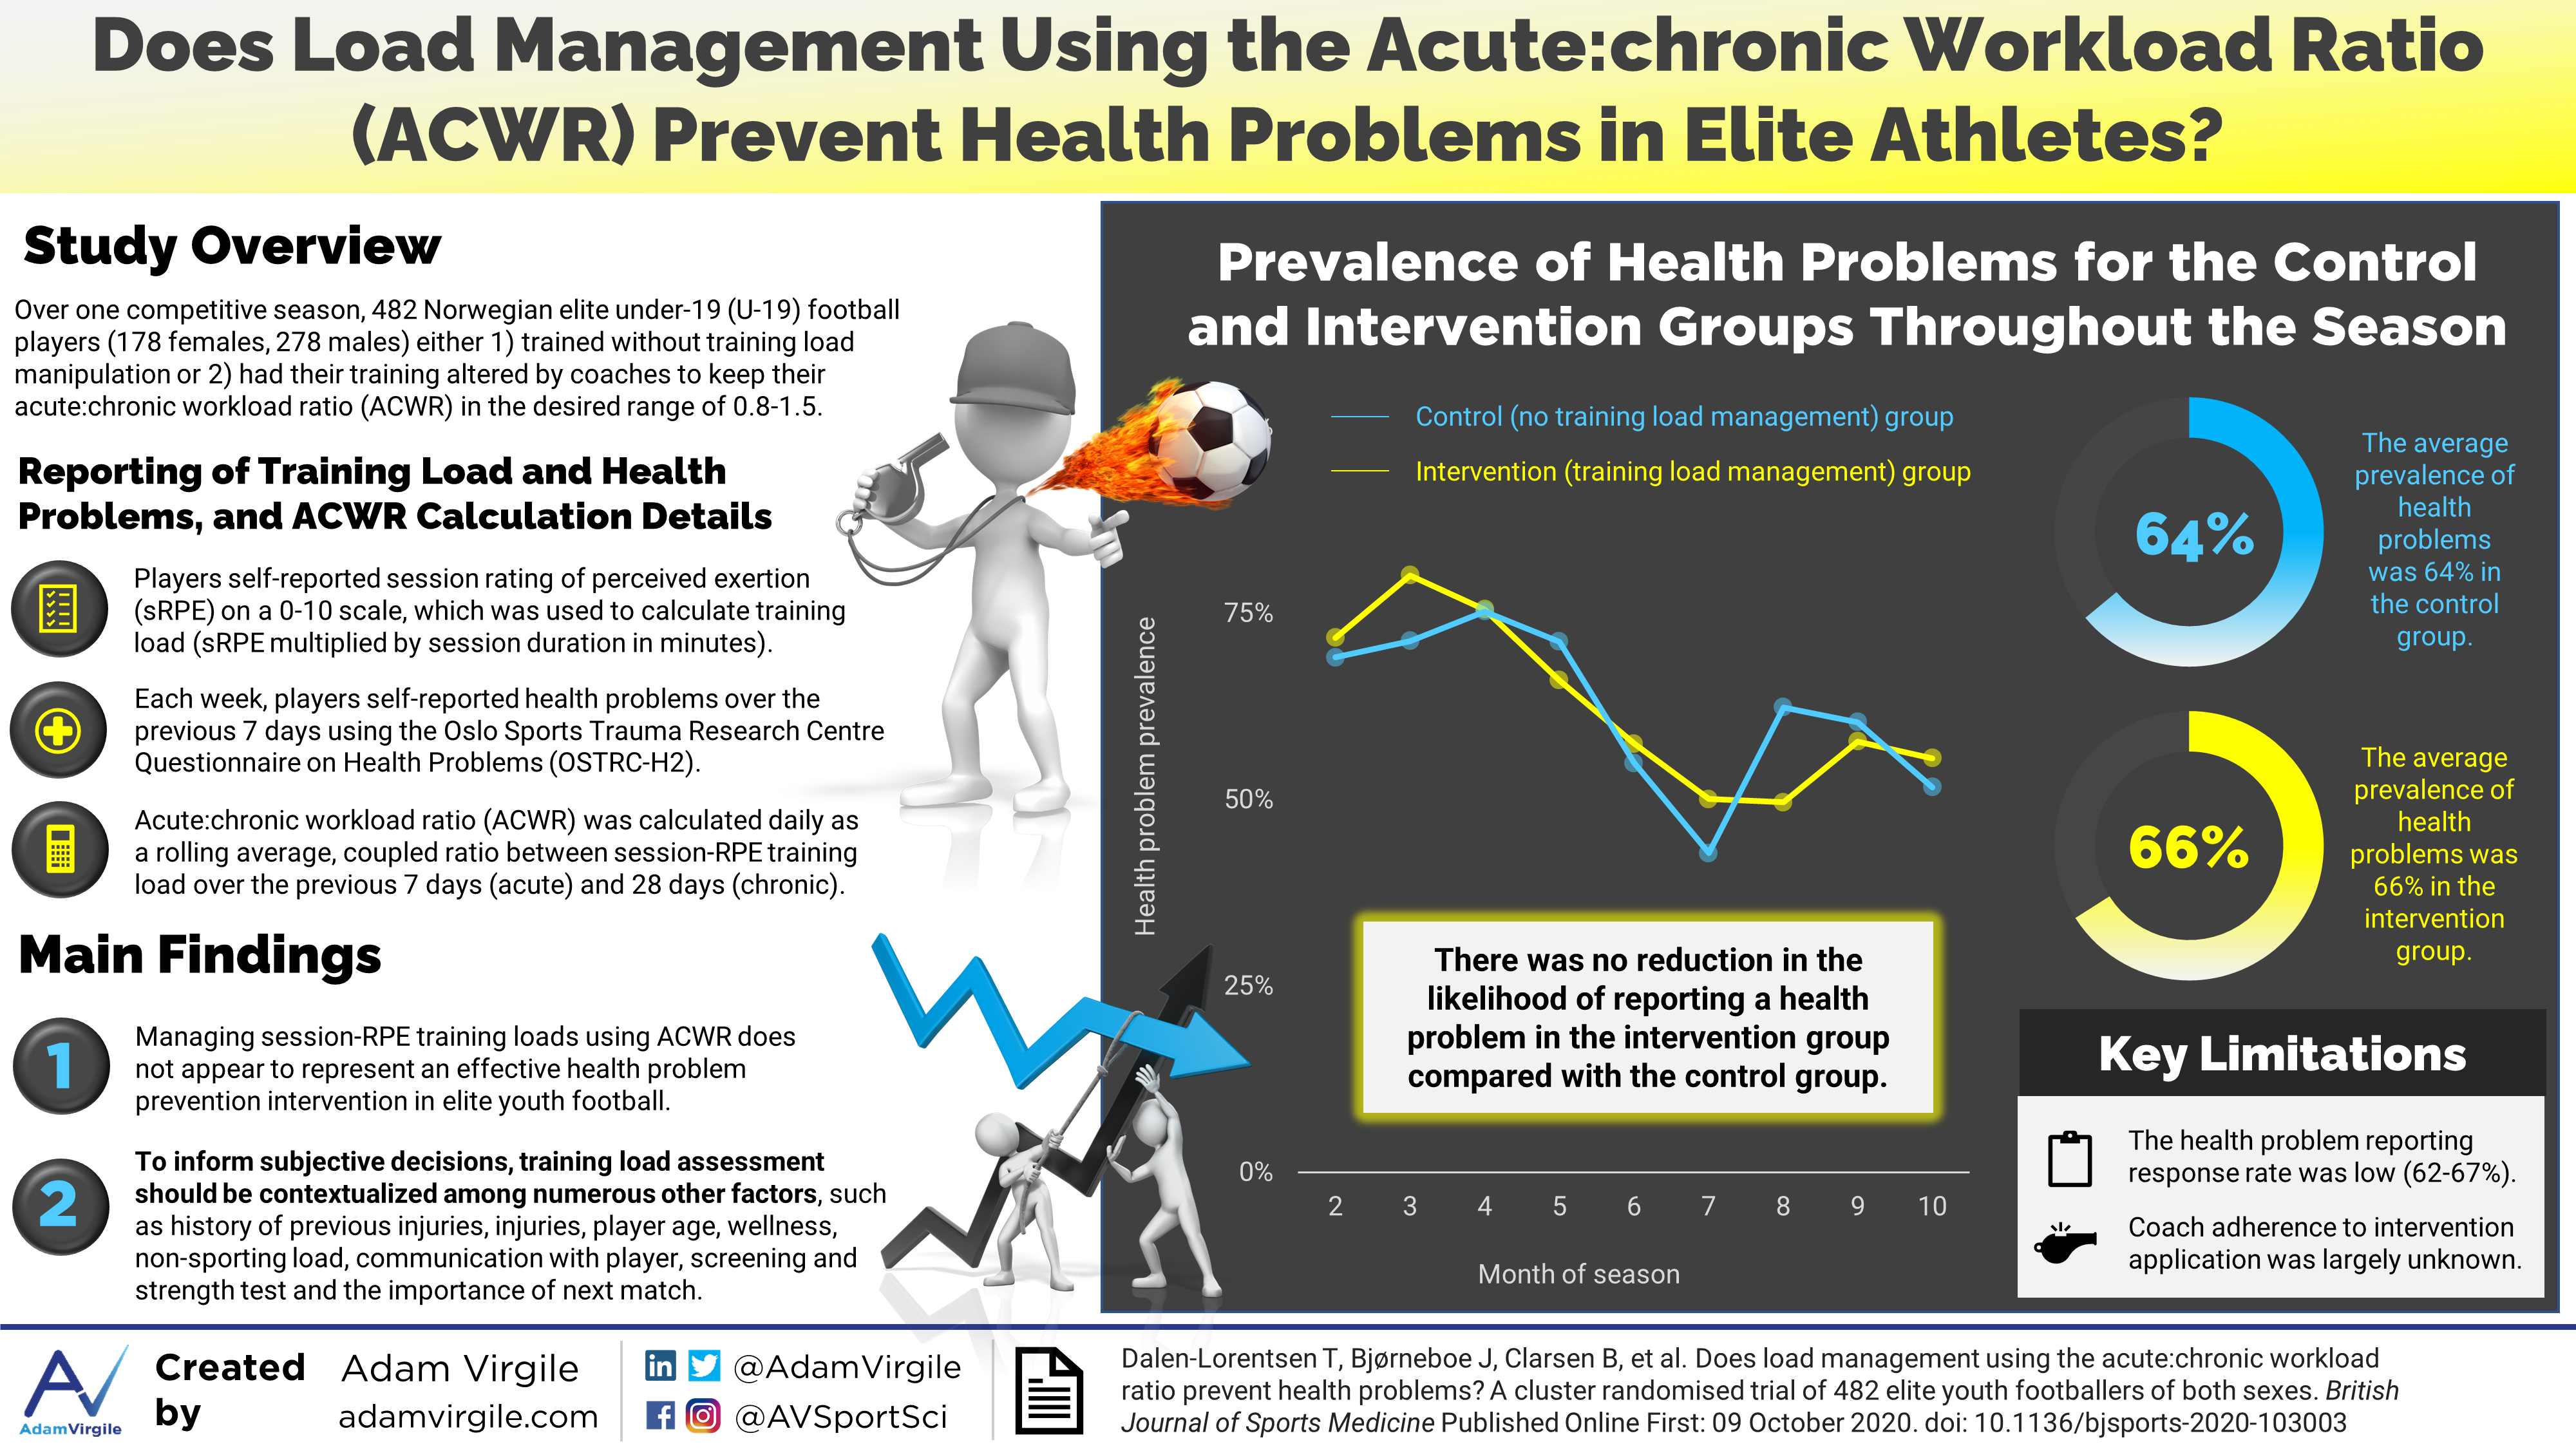 You are currently viewing Does load management using the acute:chronic workload ratio prevent health problems? A cluster randomised trial of 482 elite youth footballers of both sexes